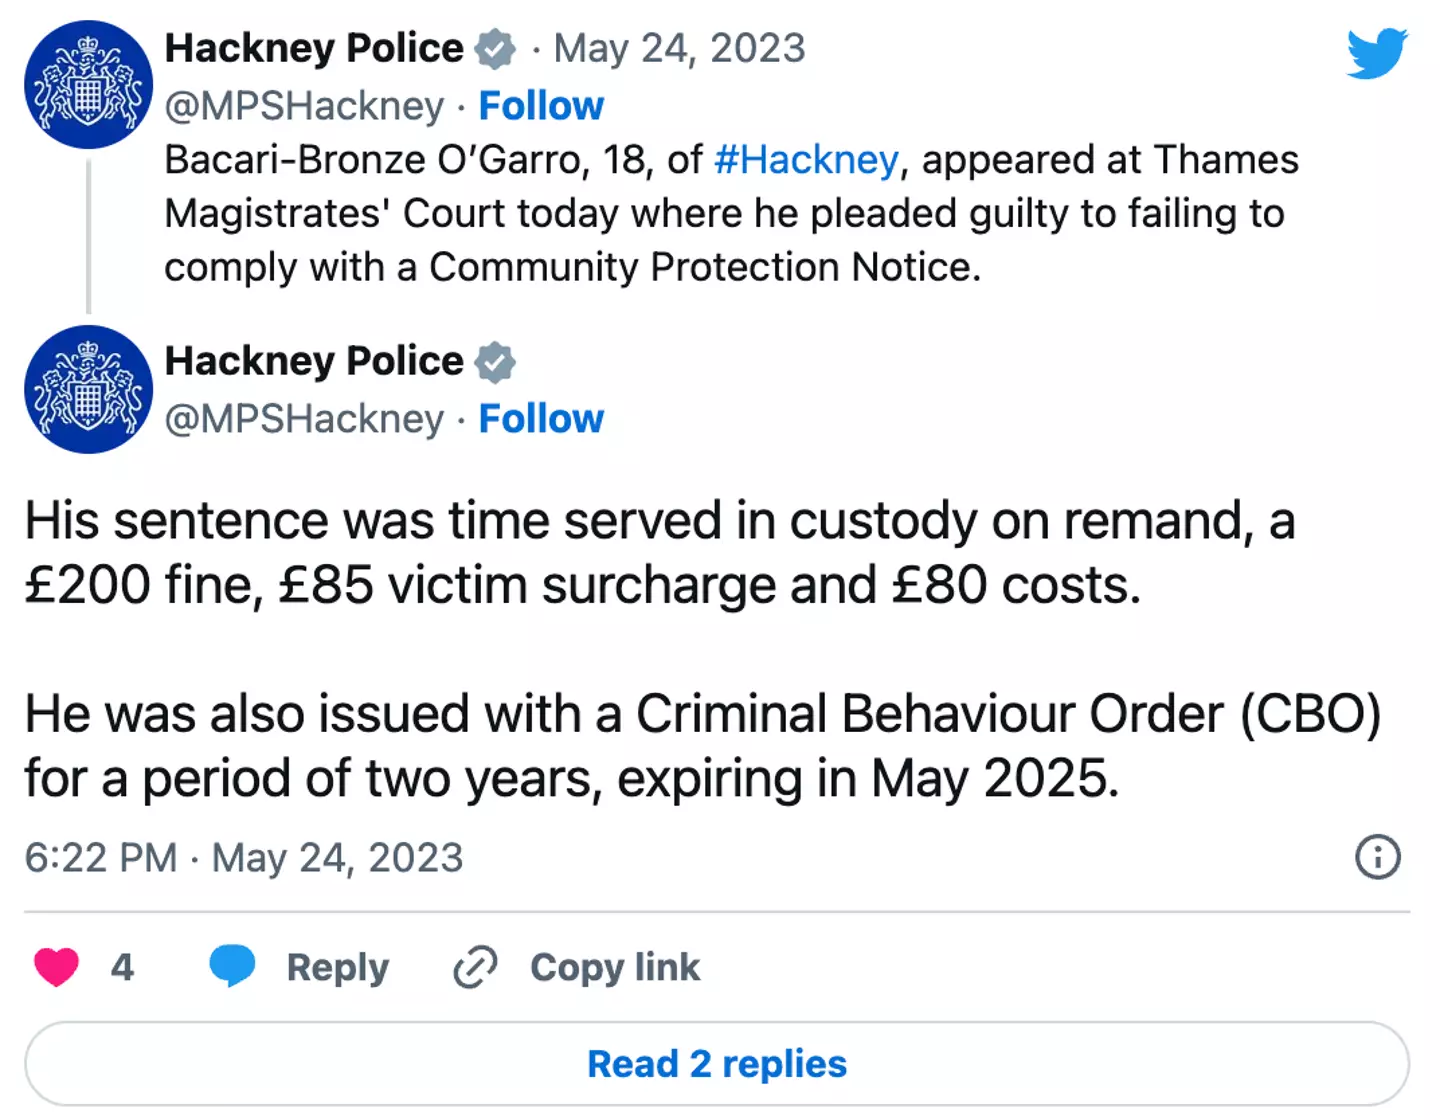 The results of the court proceedings were posted to social media by Hackney Police.